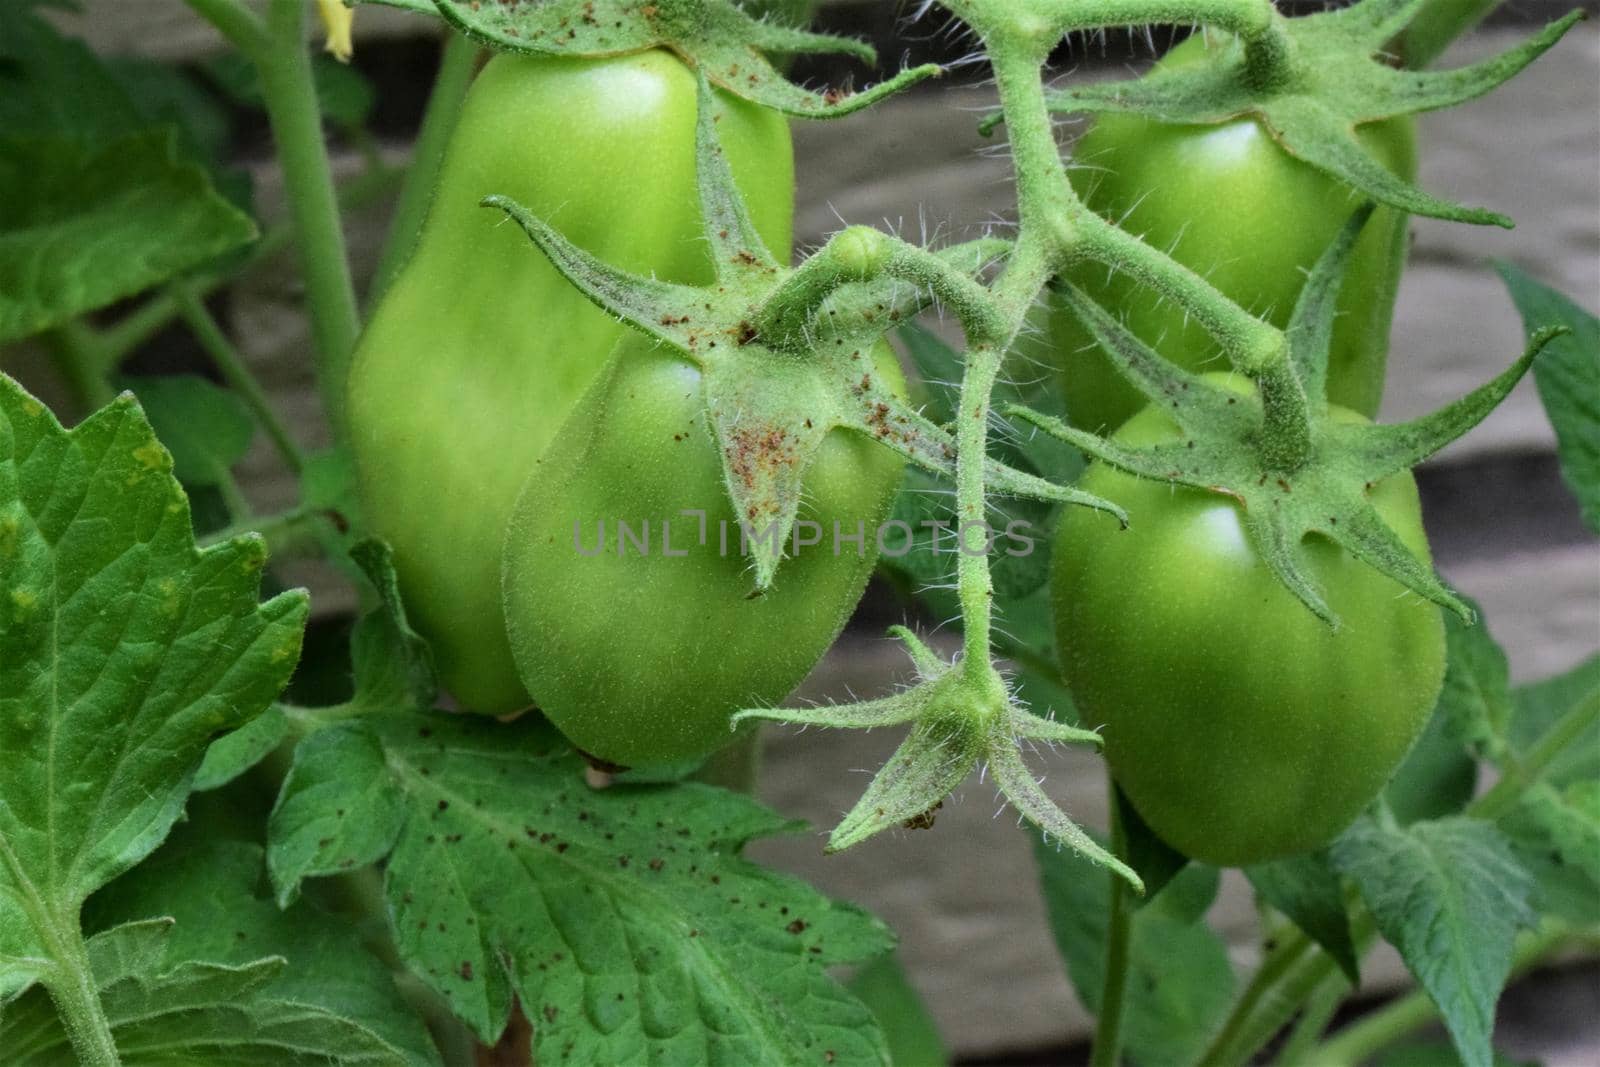 Unripe green tomatoes on the stem as a close-up